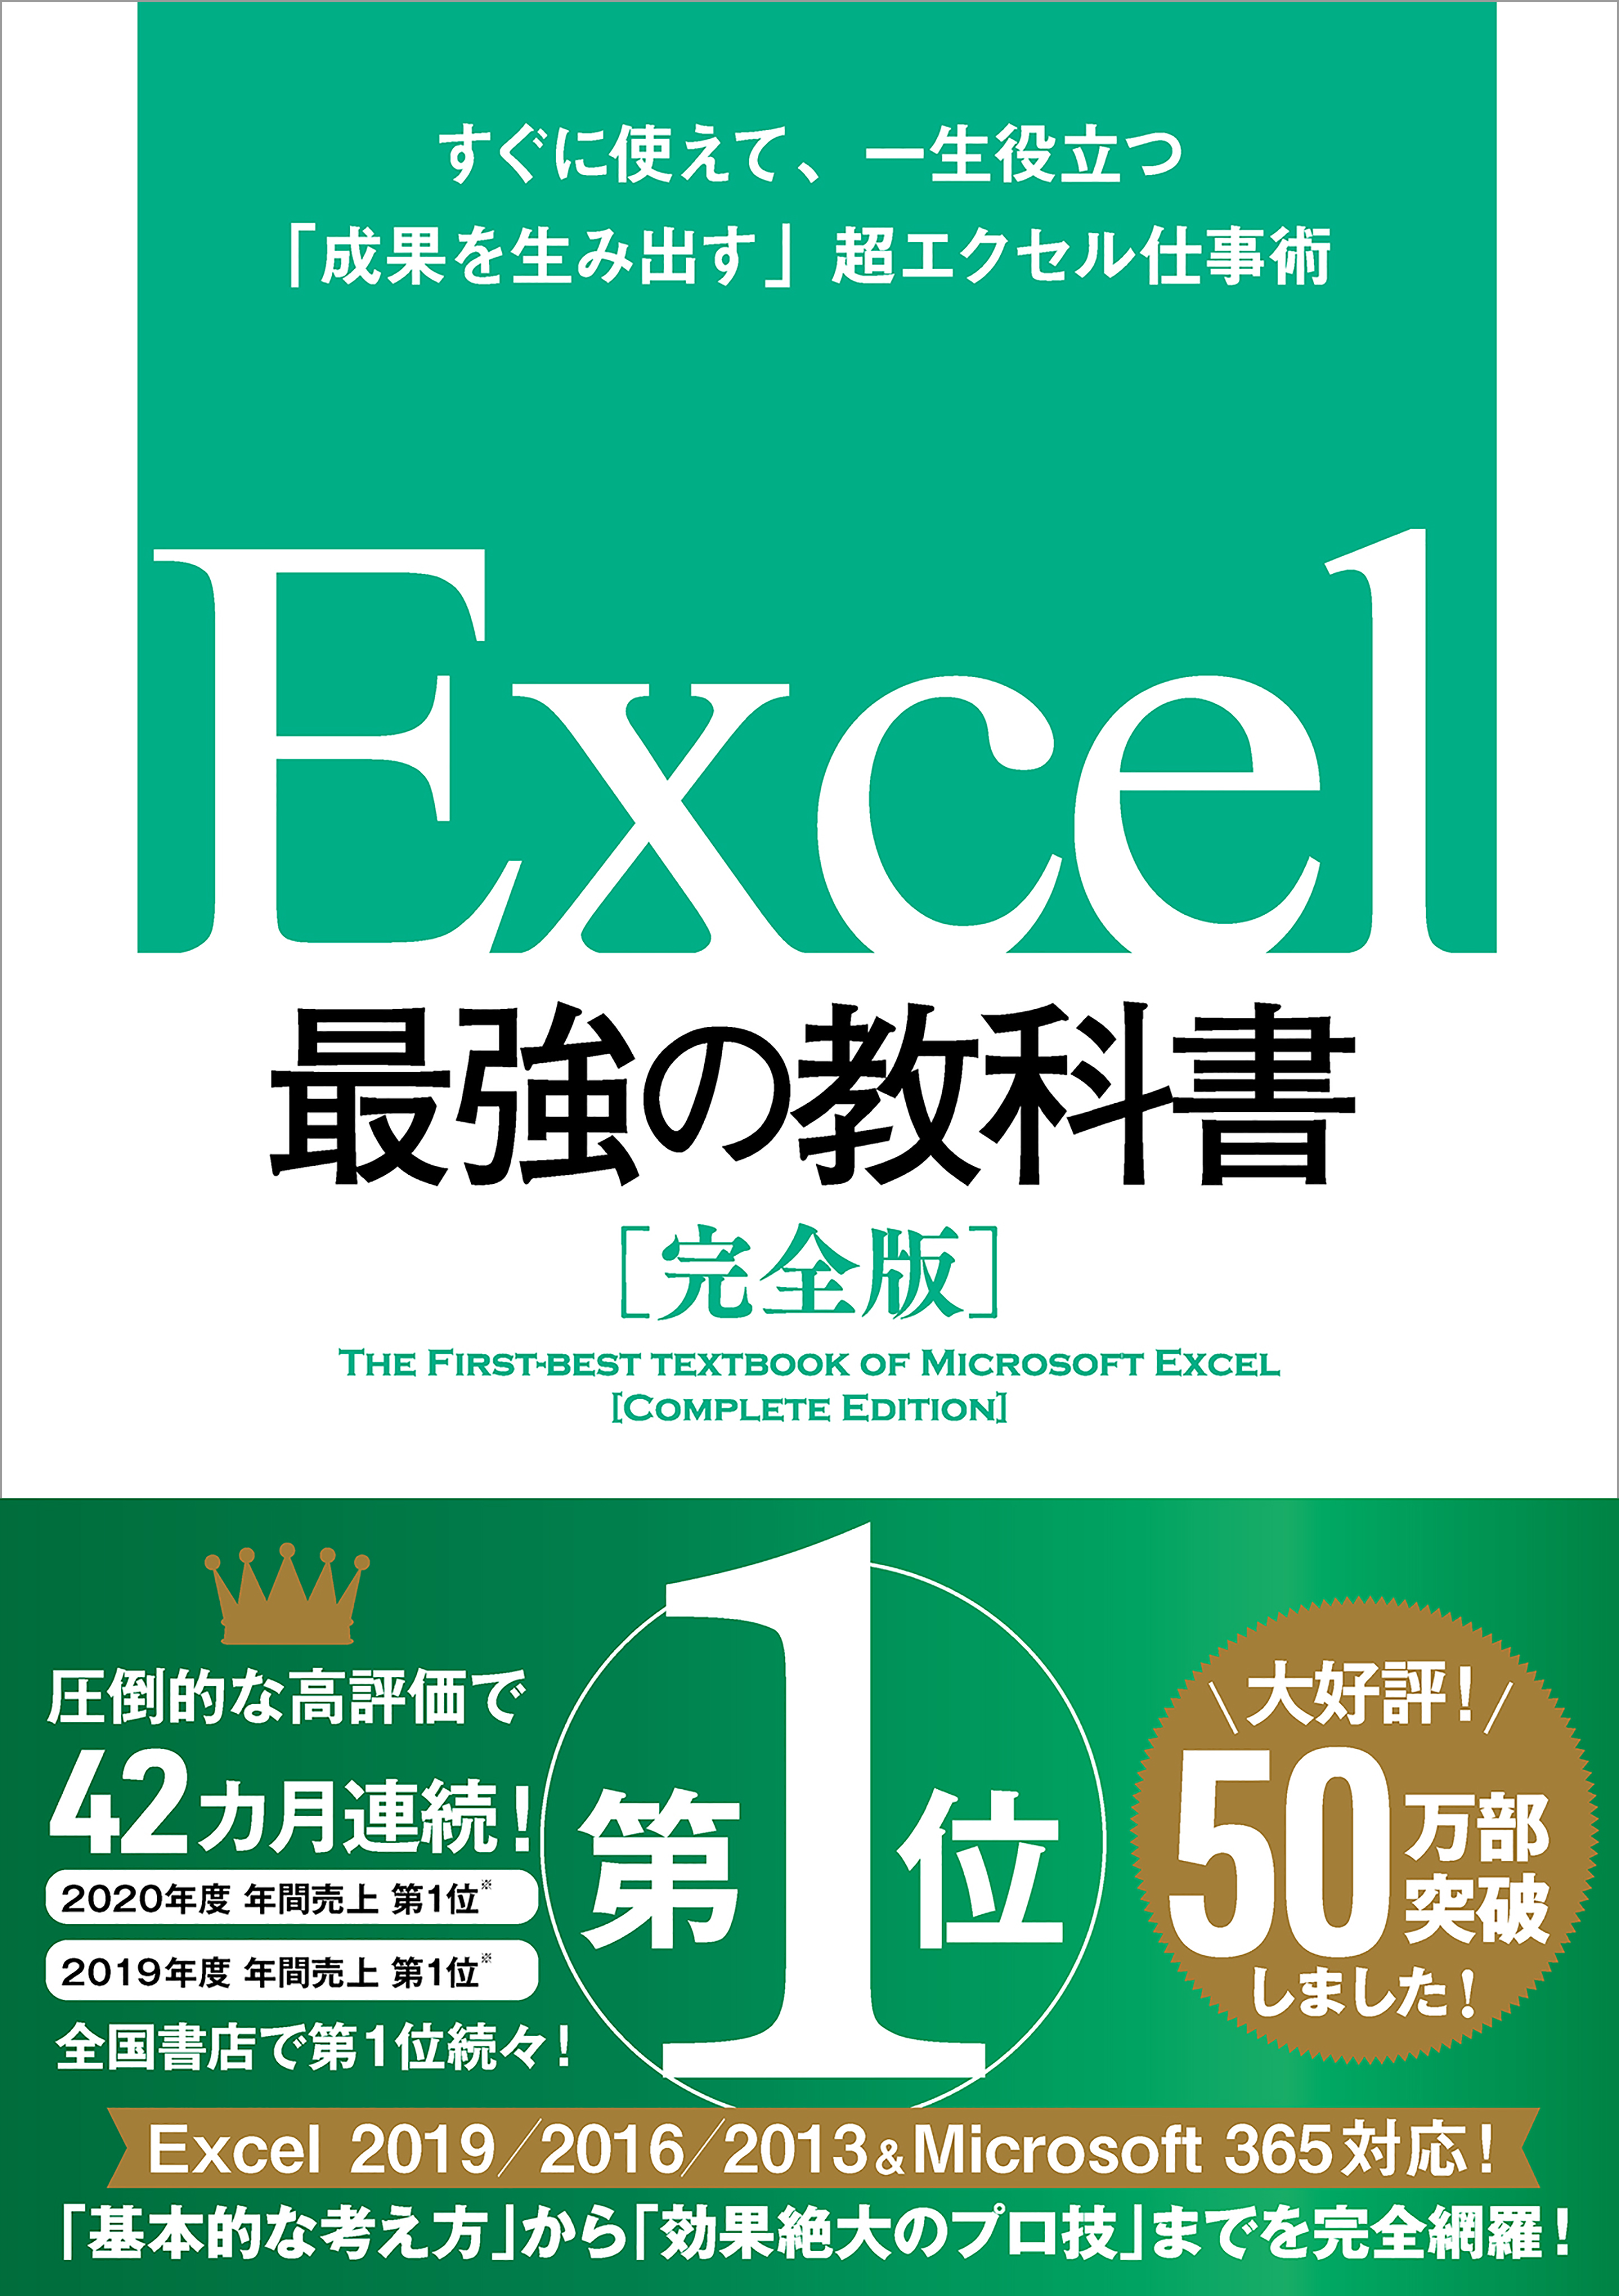 Excel 最強の教科書［完全版］――すぐに使えて、一生役立つ「成果を 